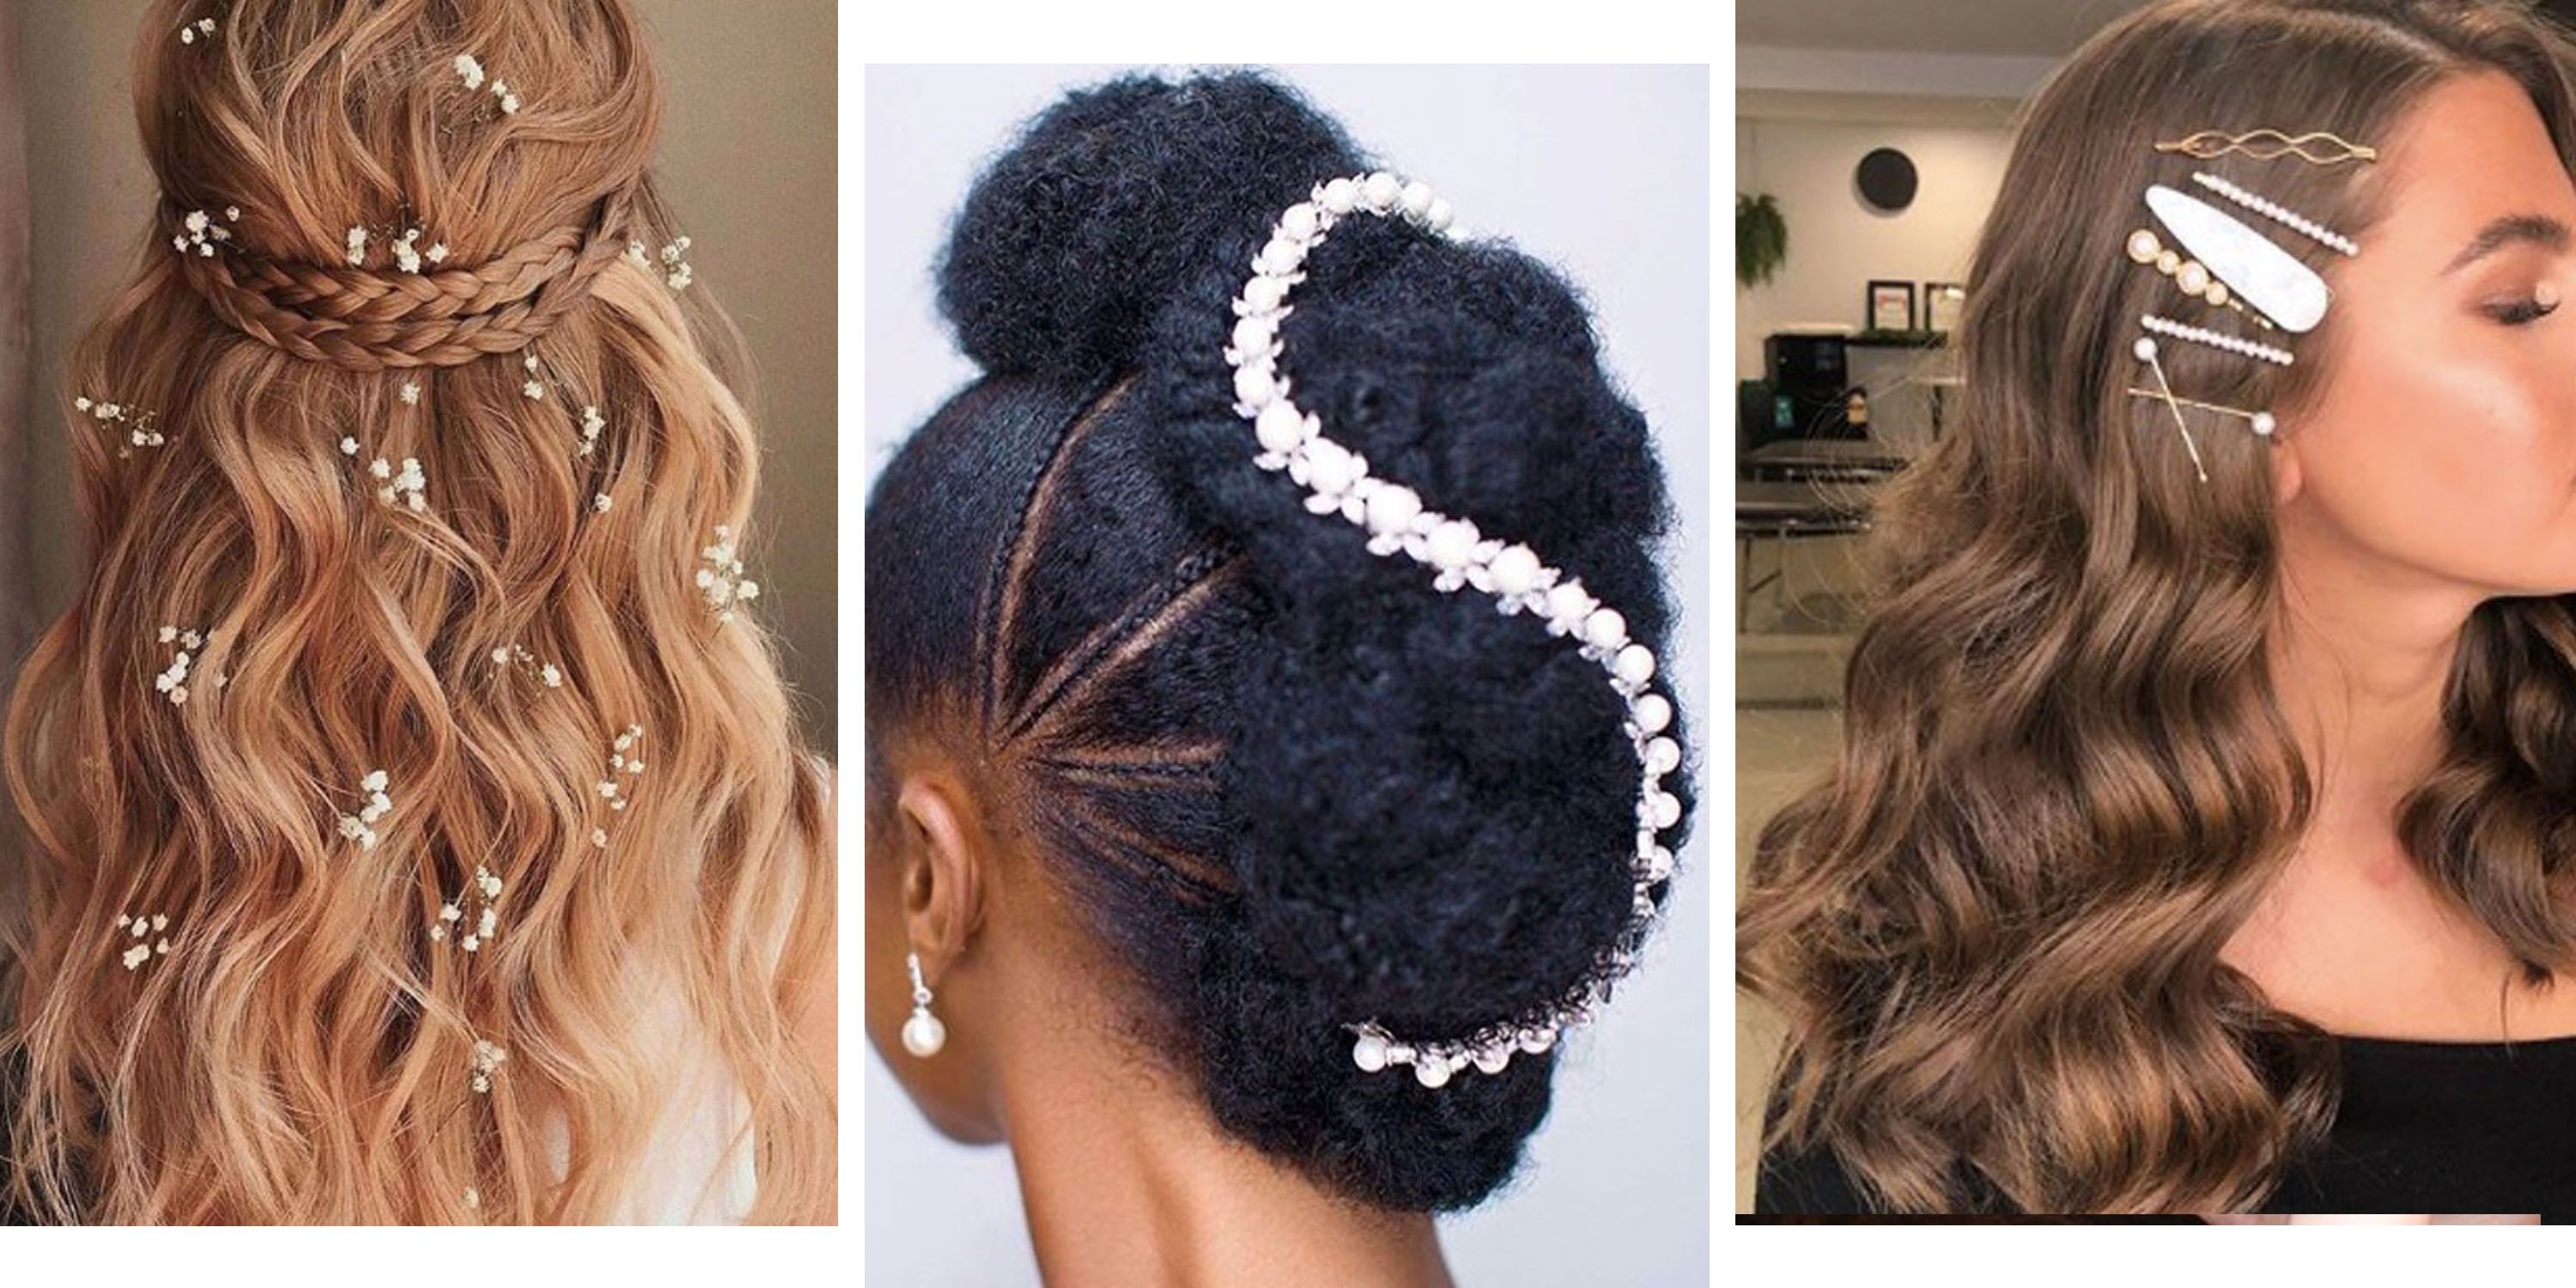 These ponytail hairstyles will take your hairstyle to the next level | Long  hair styles, Ponytail bridal hair, Ponytail hairstyles